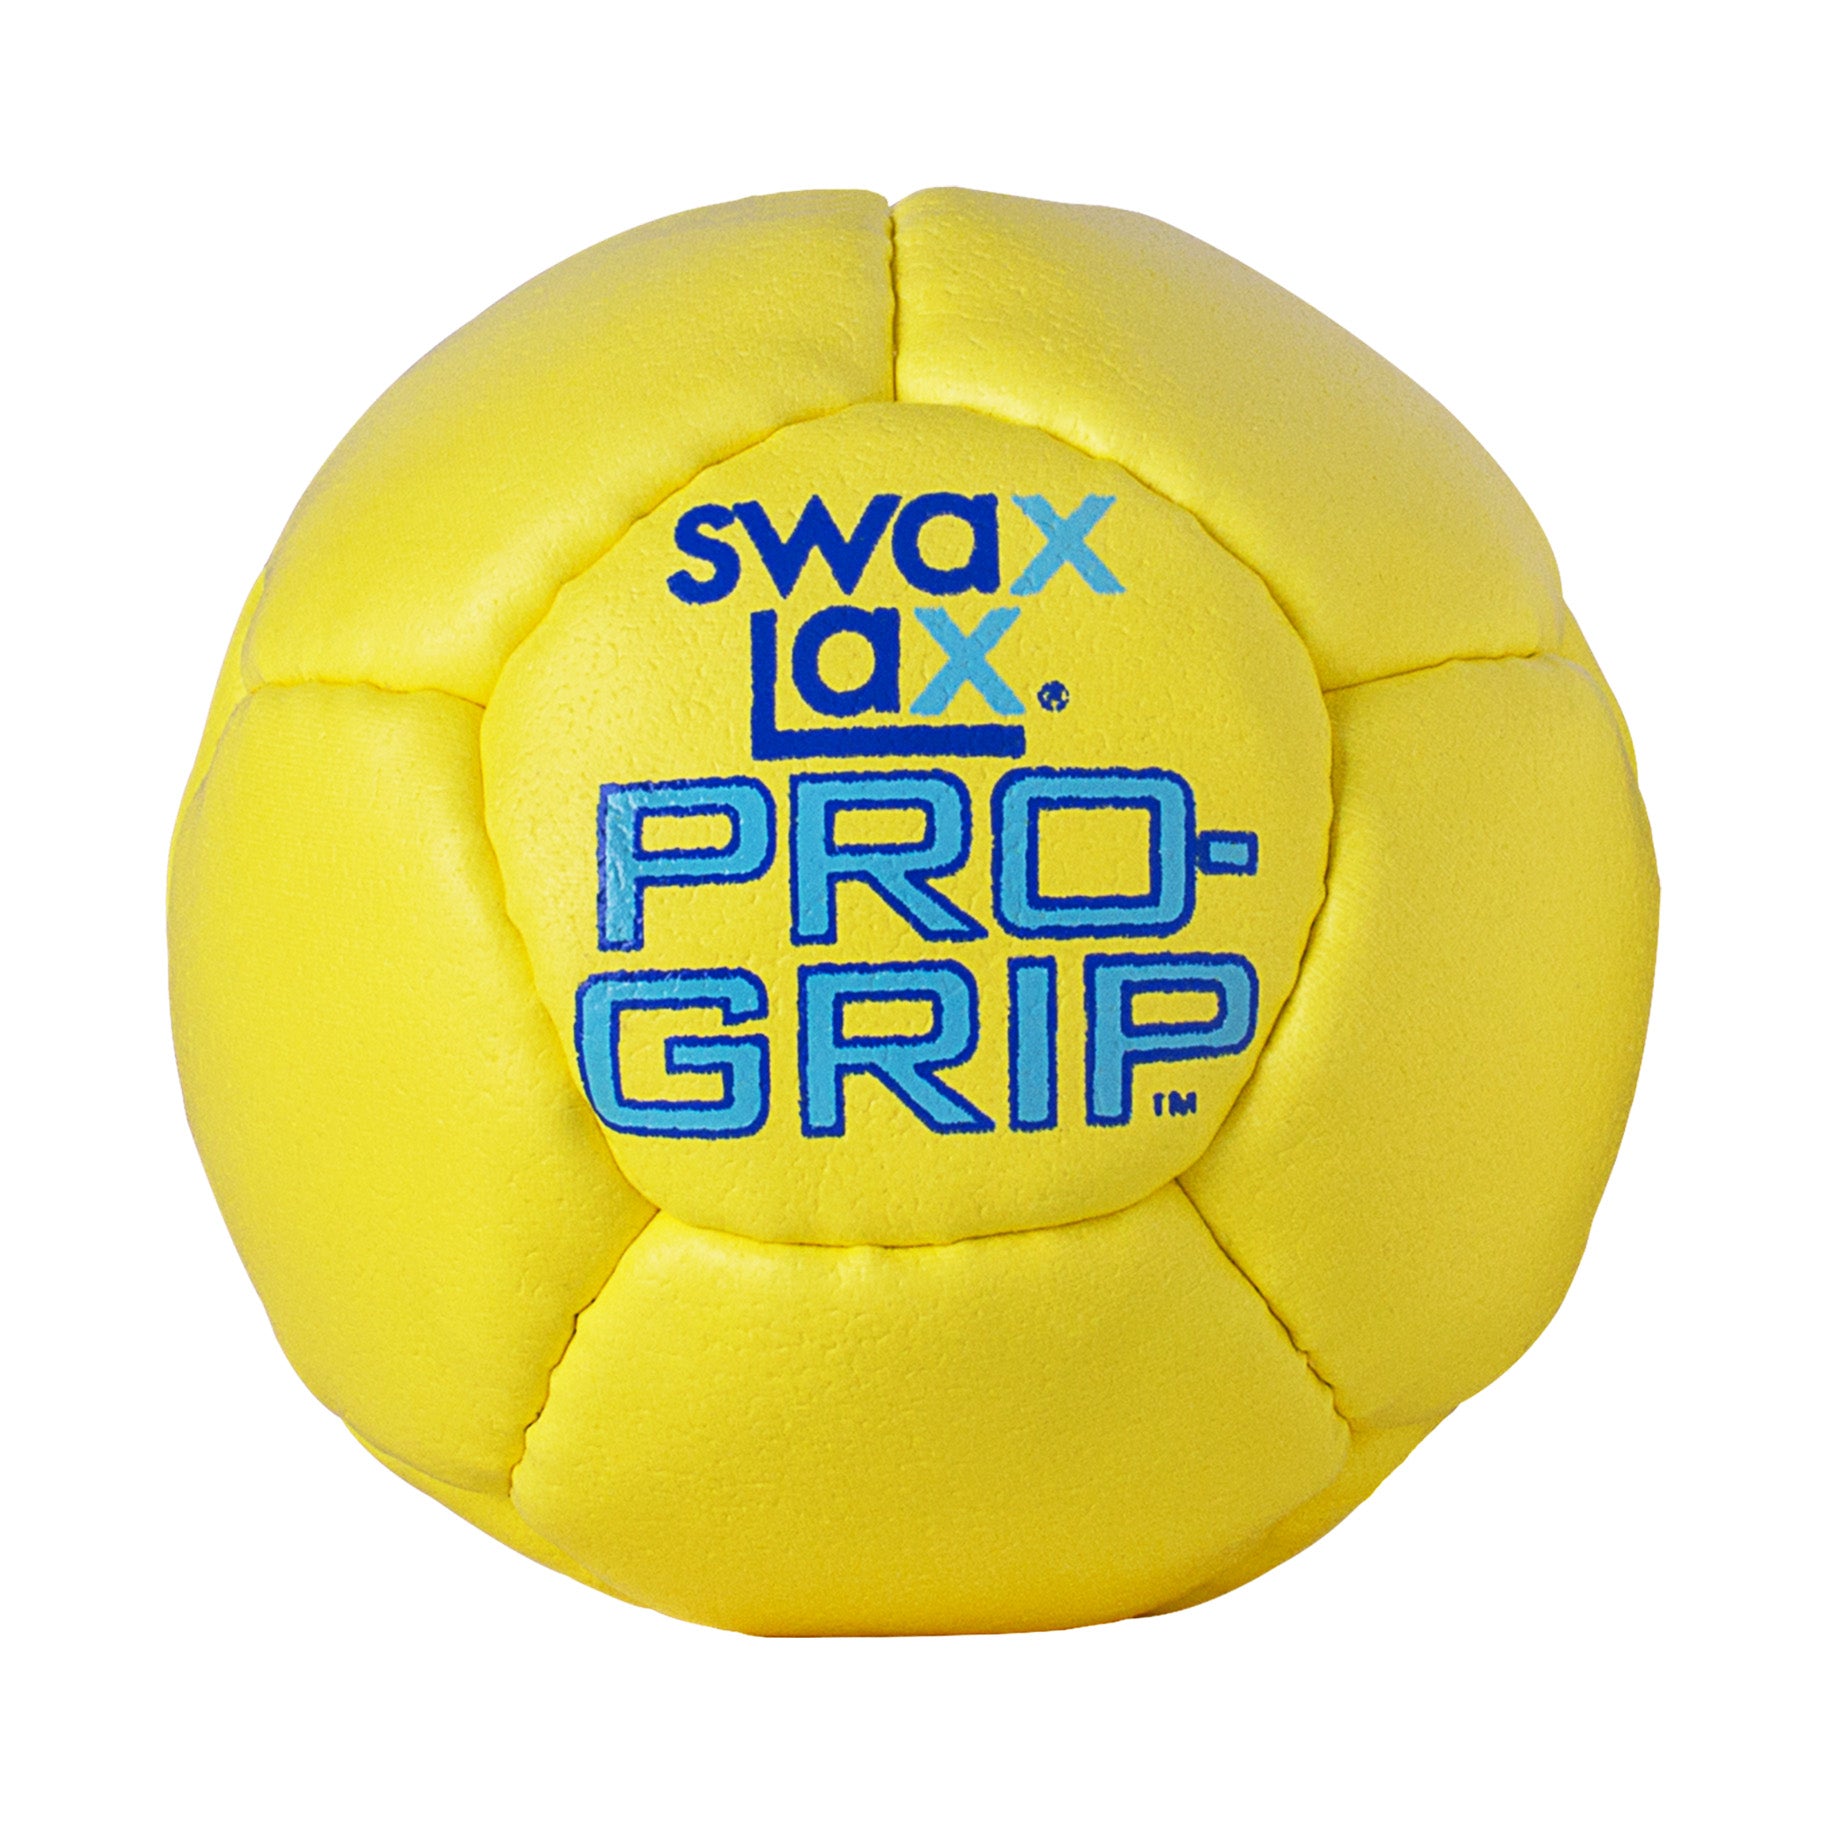 Yellow Pro-Grip Swax Lax lacrosse training ball with tacky texture